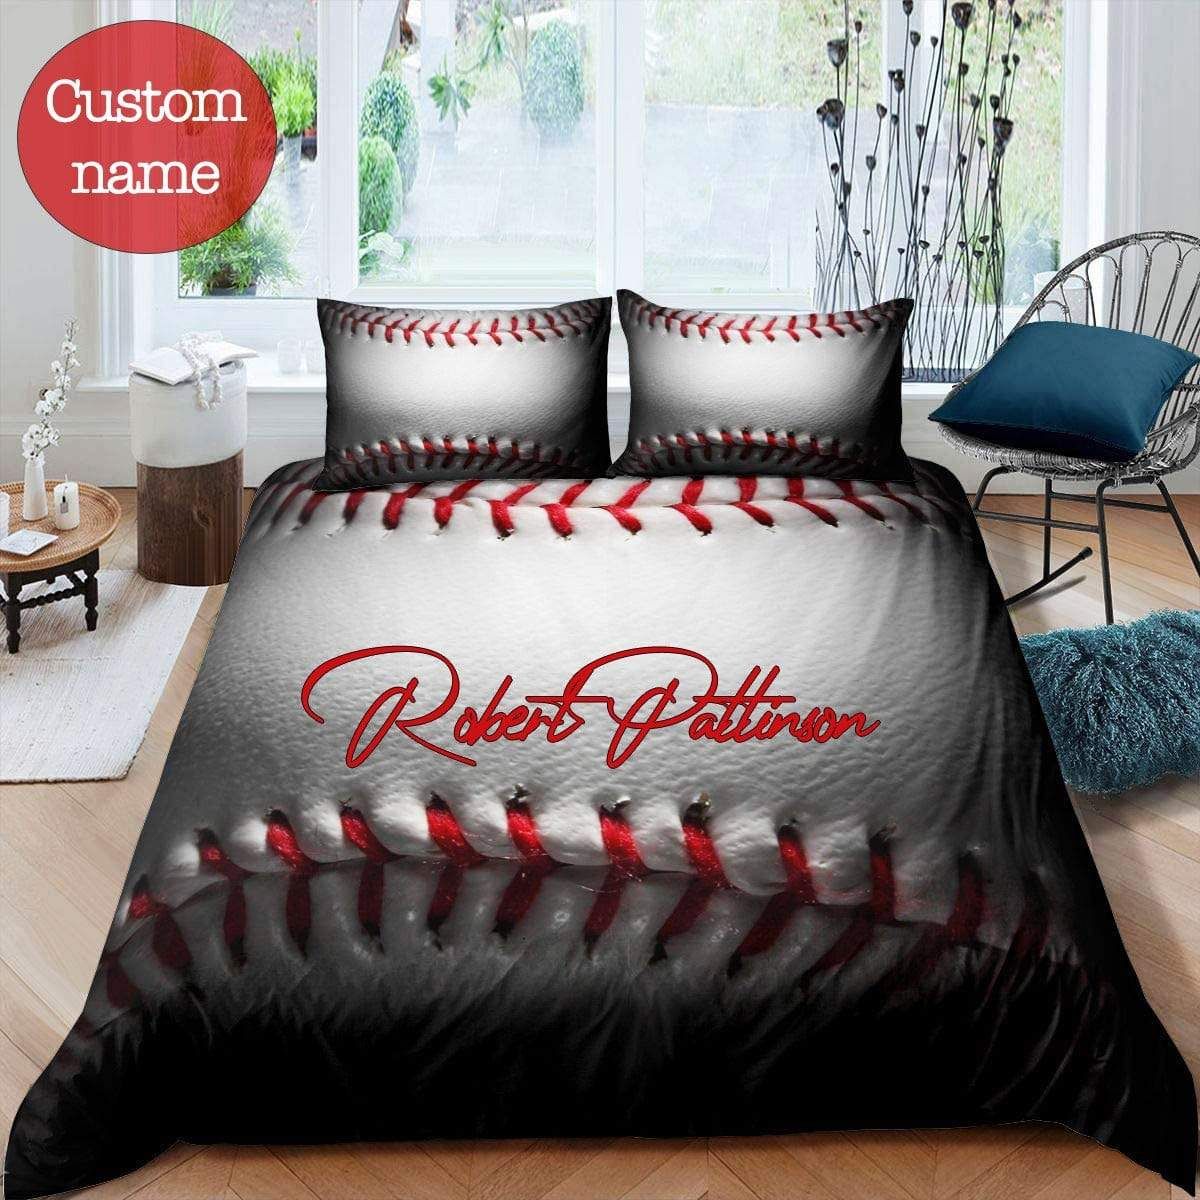 Personalized Baseball Bedding Set 3D Printing Ball With Your Name